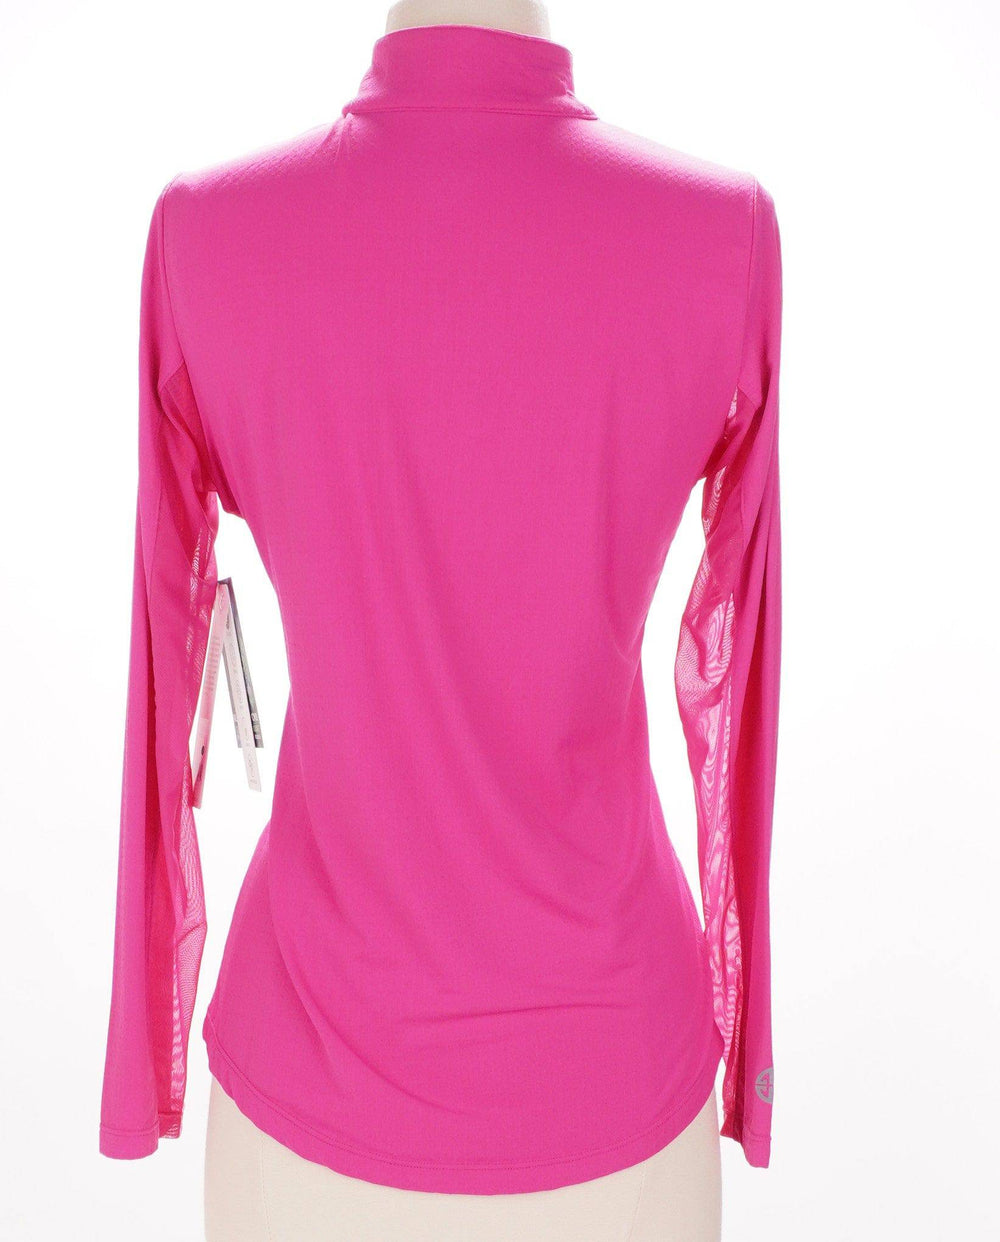 Gottex Pink / Small Gottex Hot Pink Long Sleeve Top - Size Small